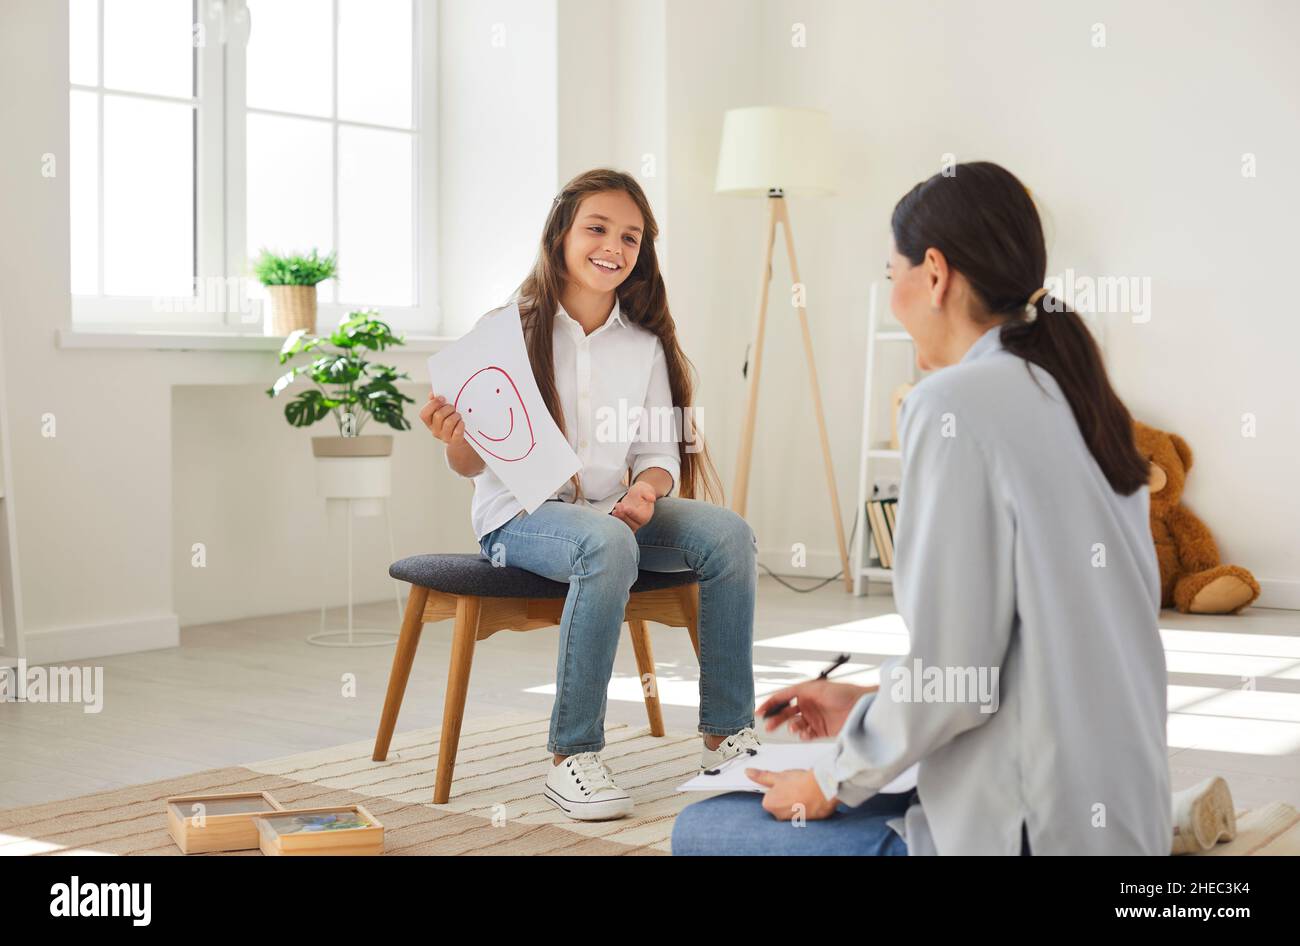 Happy teen girl in meeting with professional child psychologist talks about emotions. Stock Photo